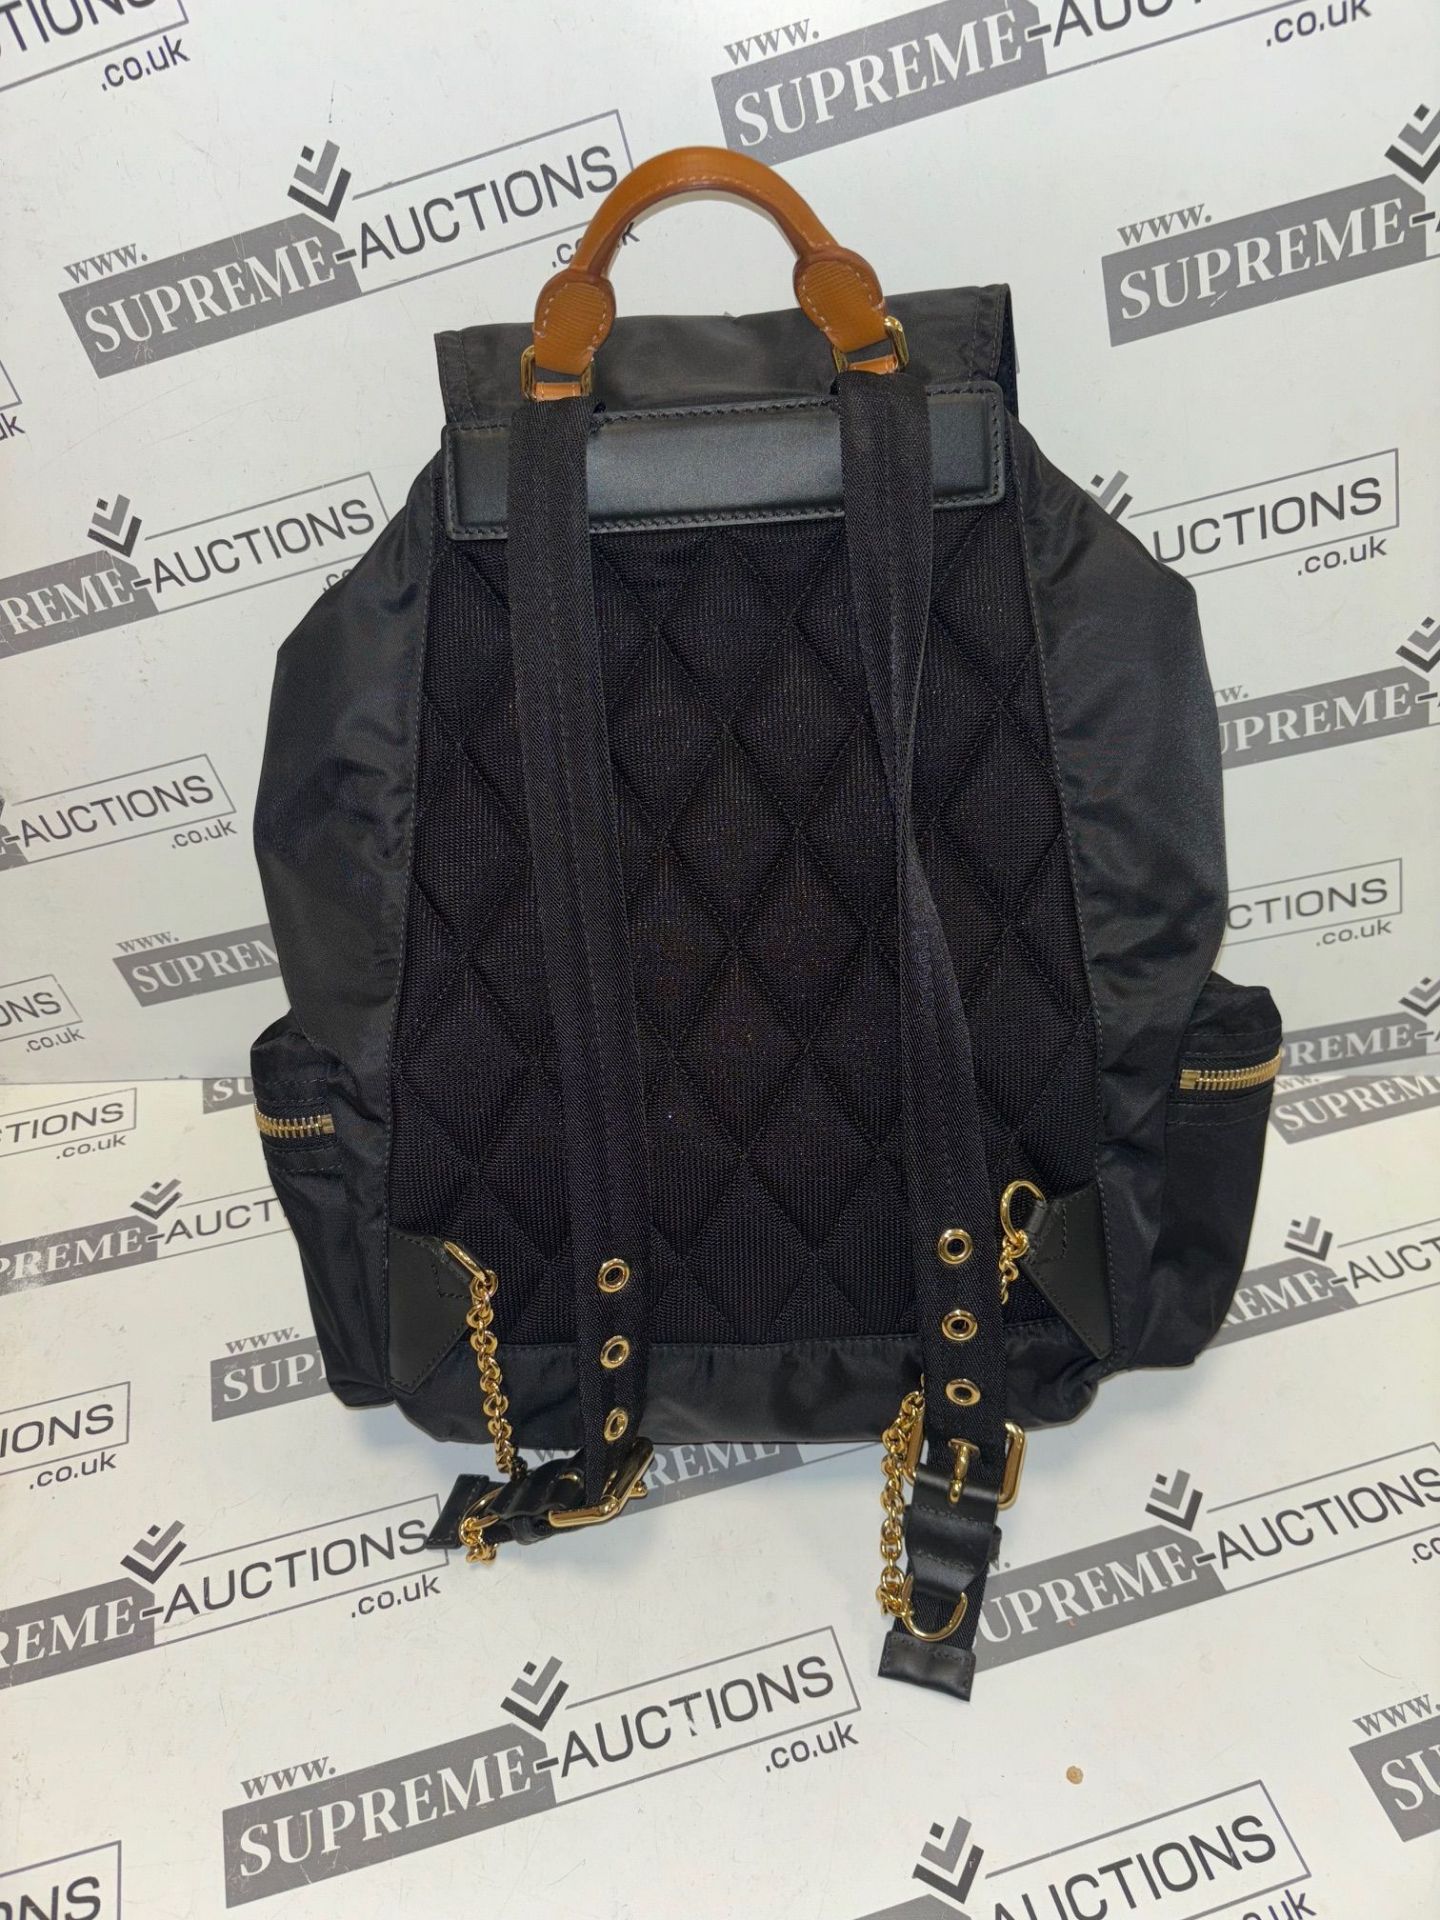 BURBERRY black nylon backpack. Personalised ZYL. 35x35cm - Image 6 of 11